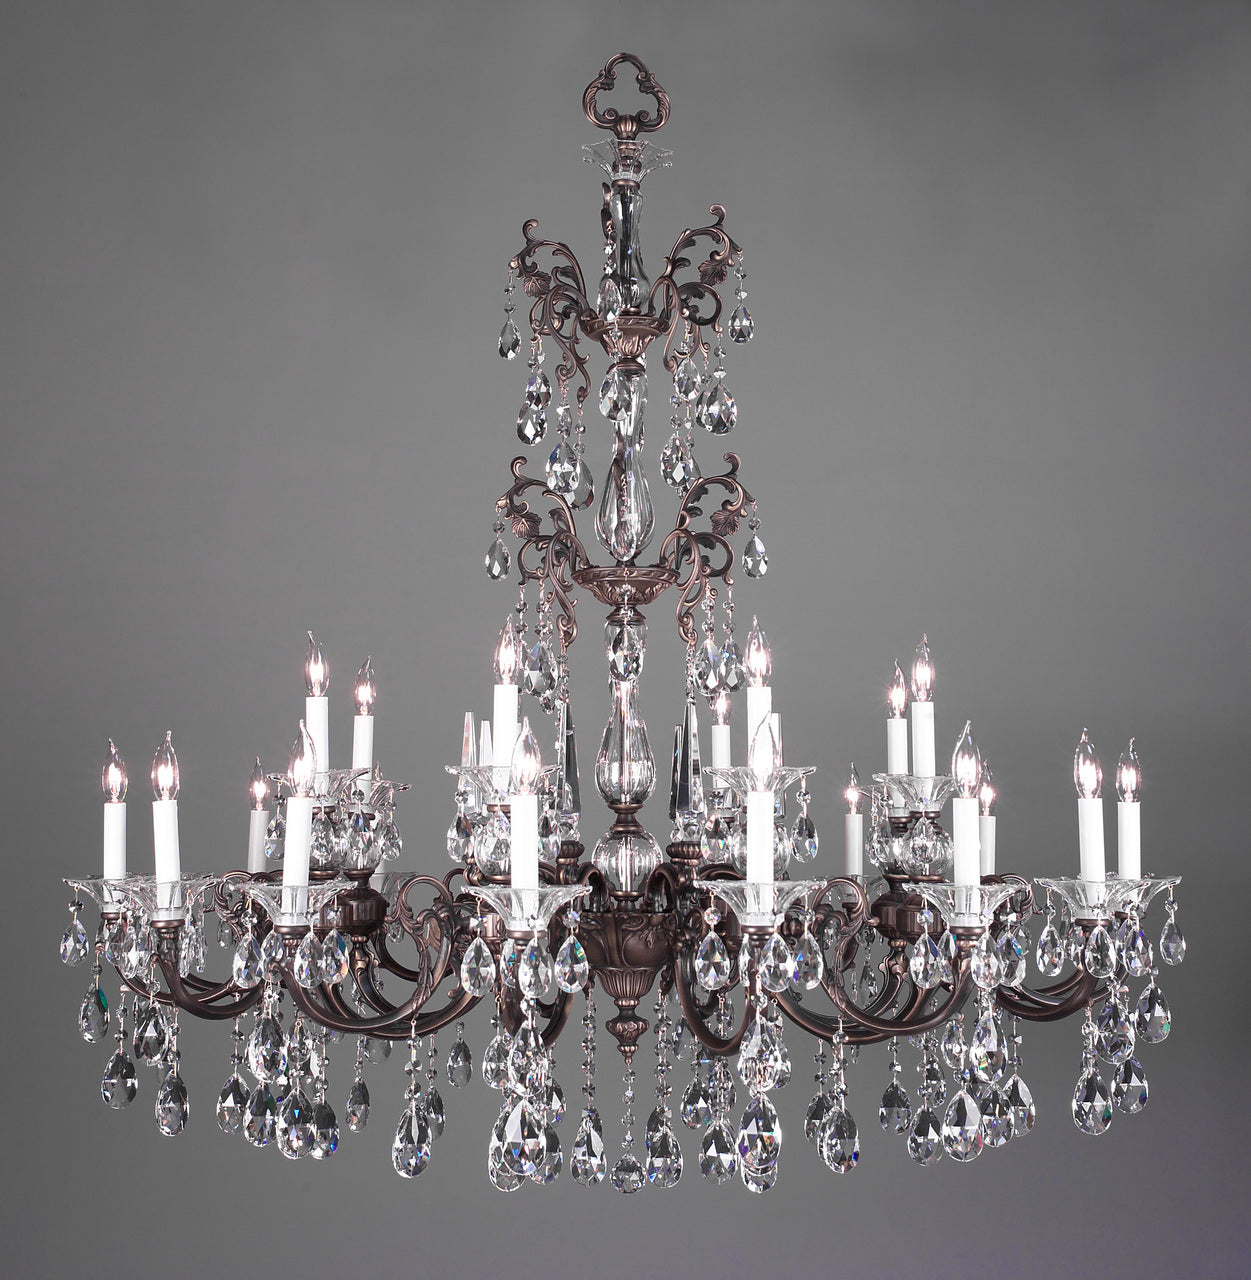 Classic Lighting 57065 RB SJT Via Lombardi Crystal Chandelier in Roman Bronze (Imported from Spain)